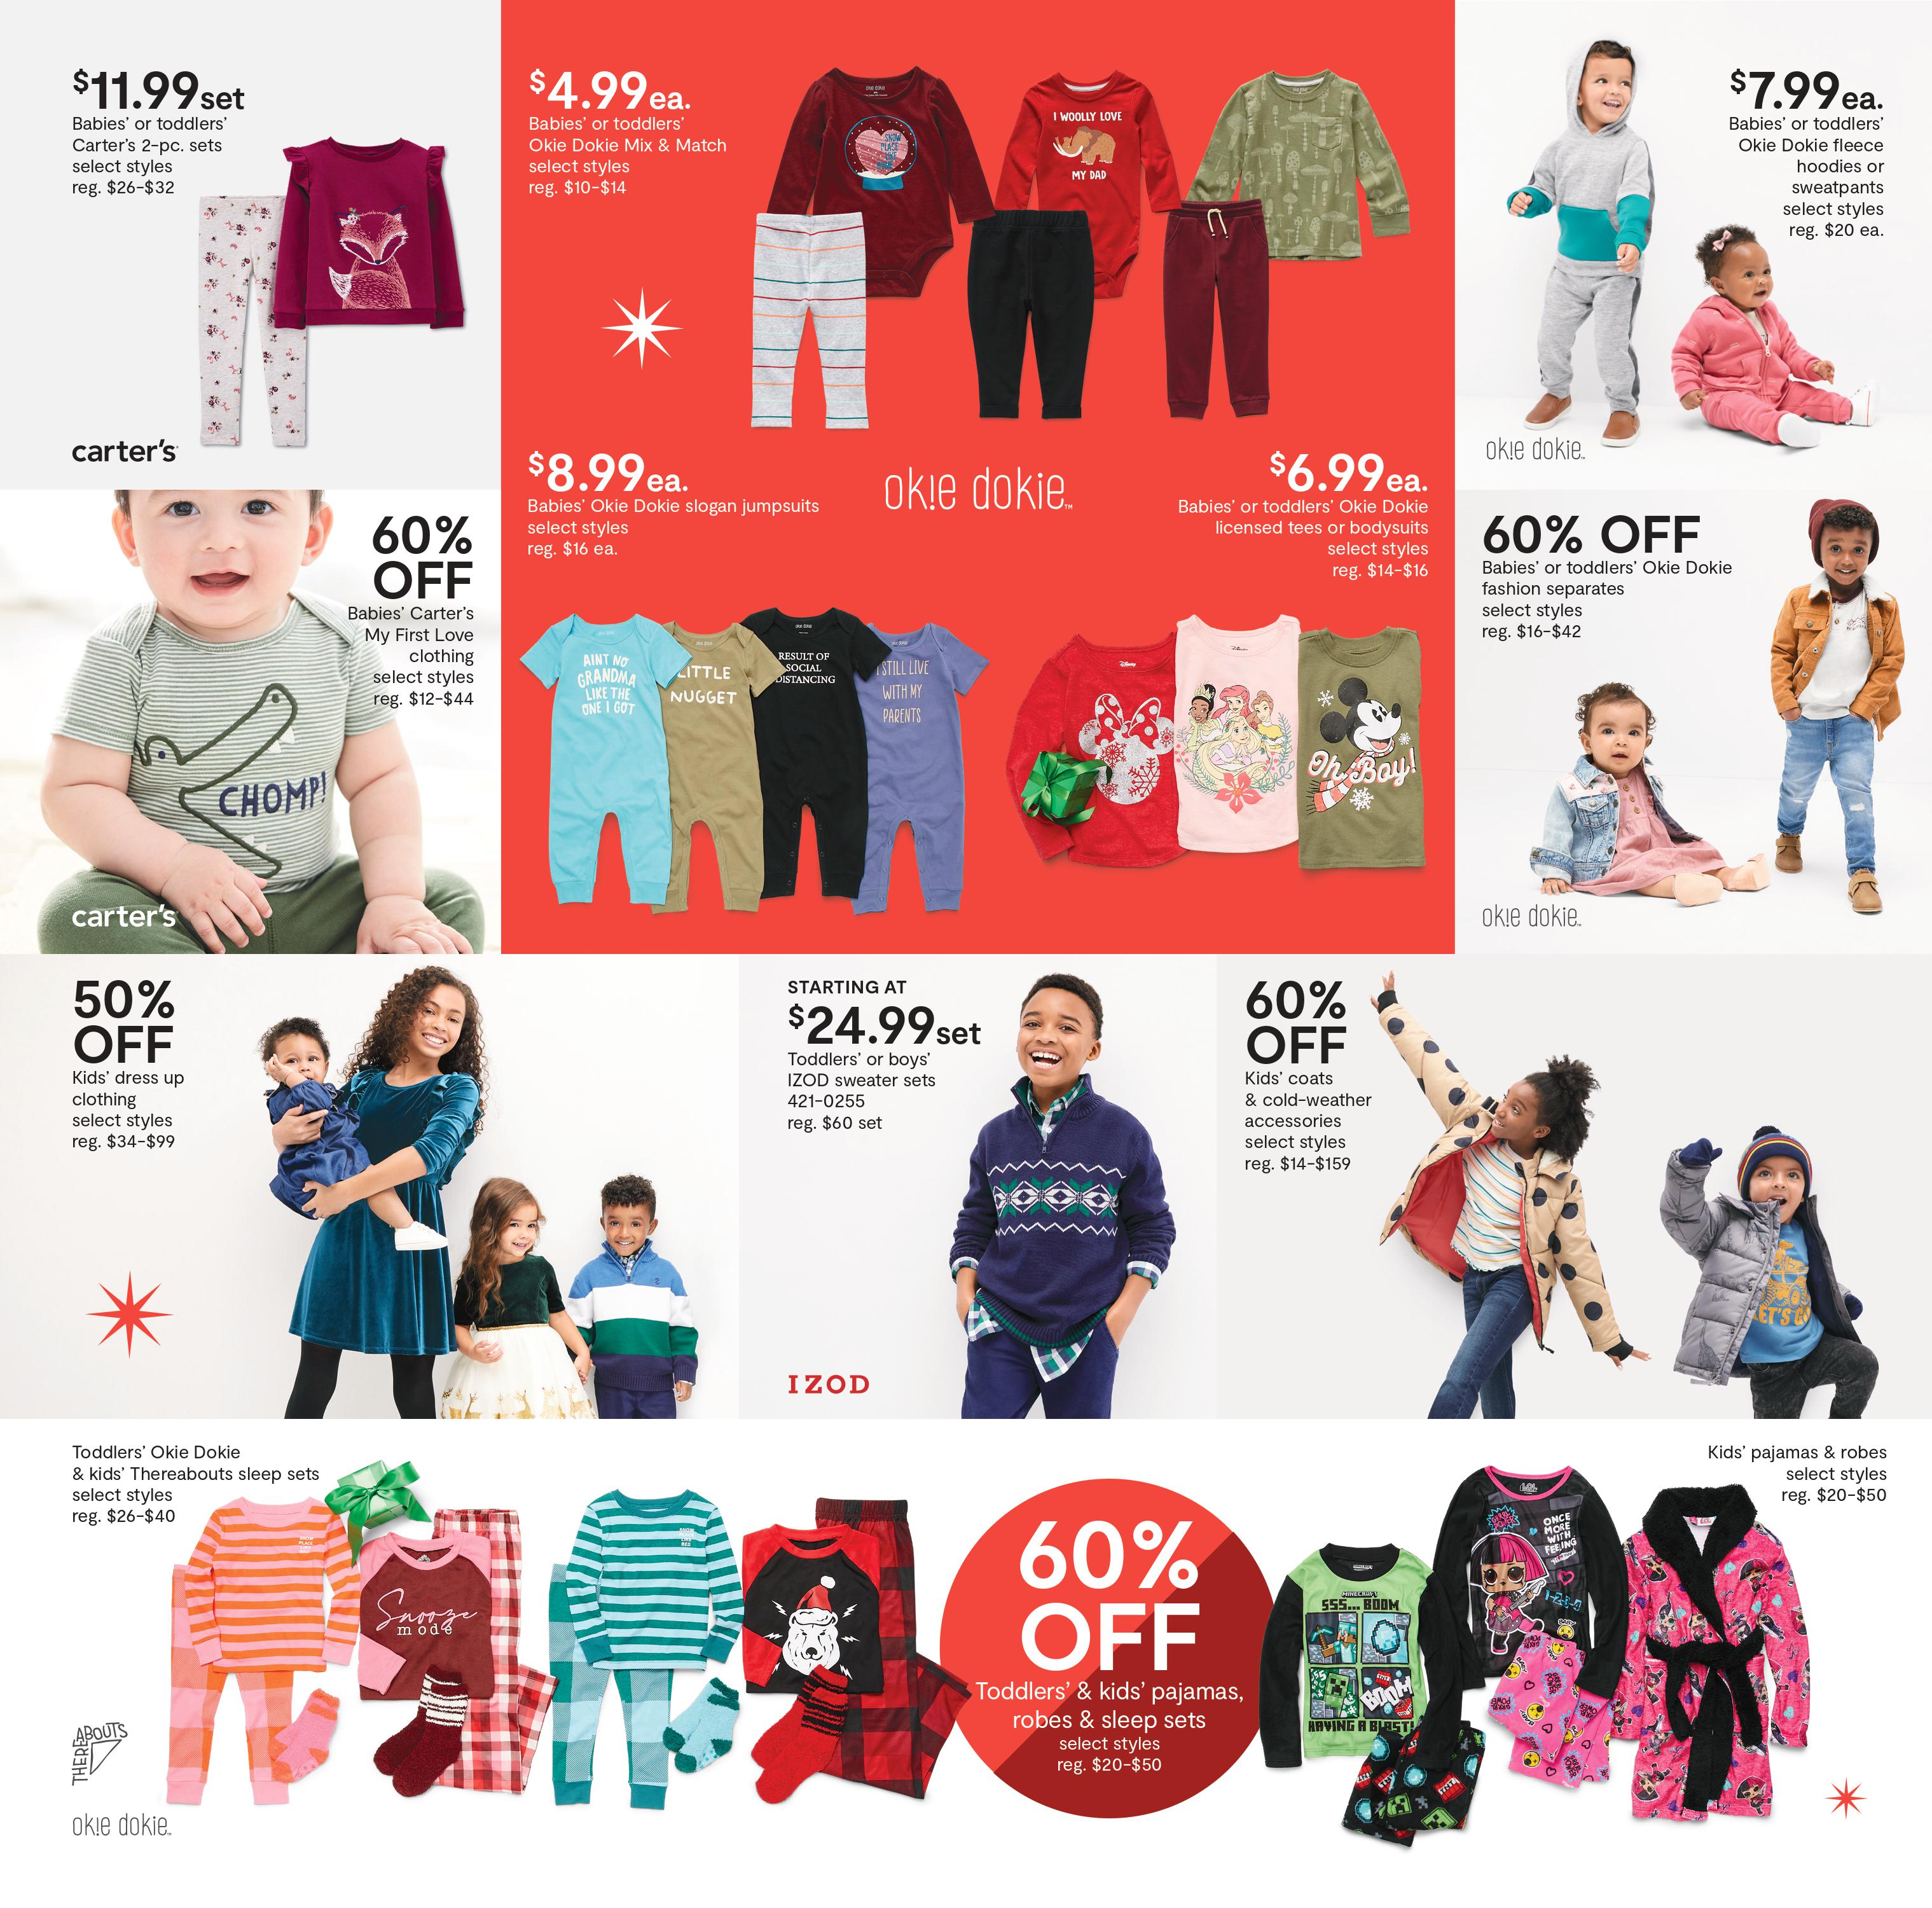 JCPenney Black Friday Ad Scan 2021